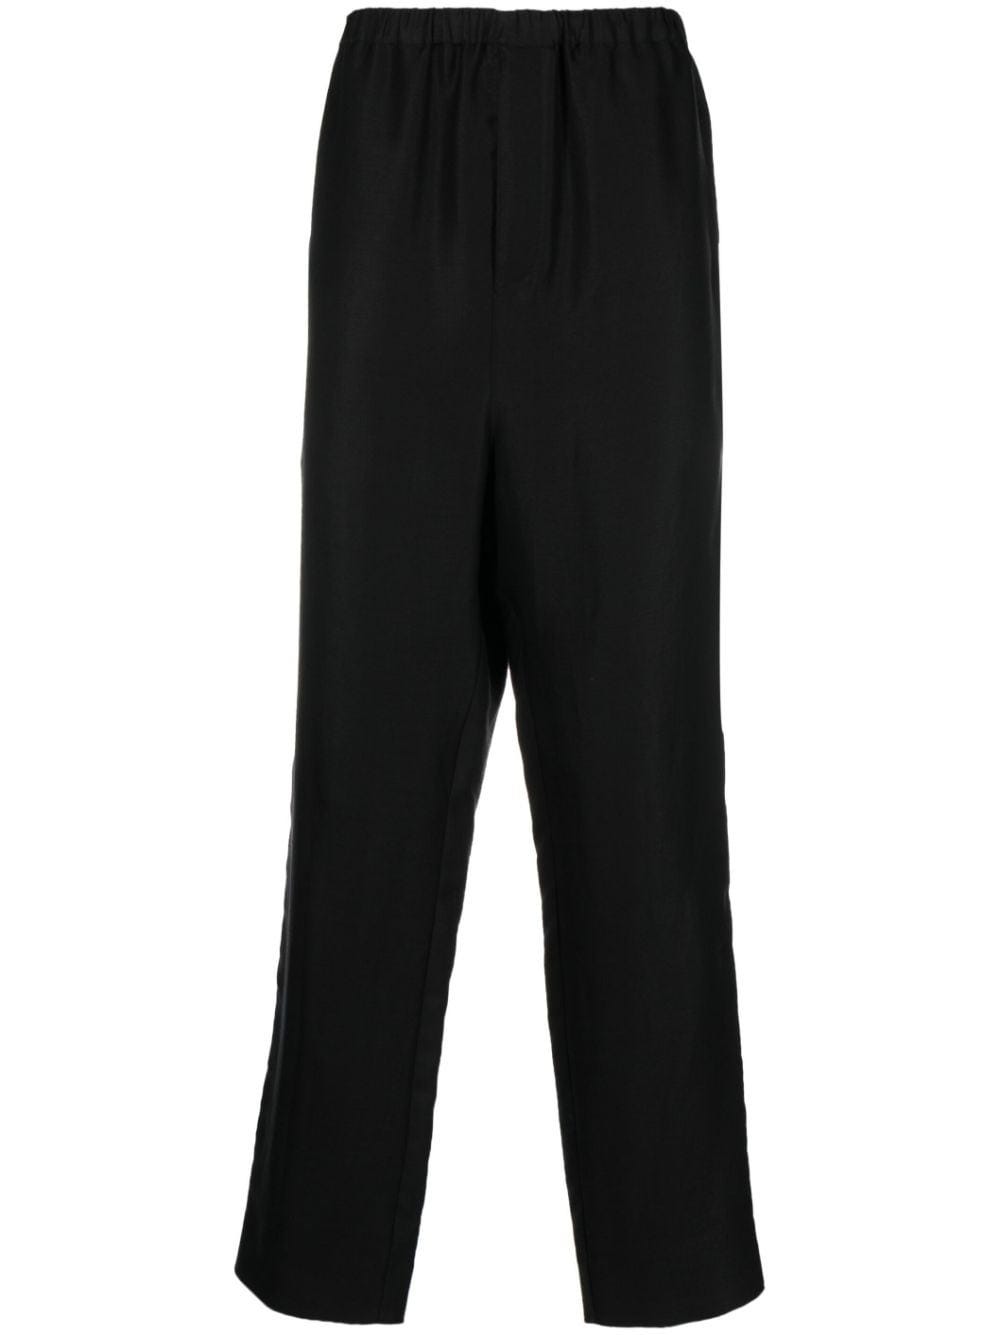 SAINT LAURENT BLACK HIGH-WAISTED TAPERED TROUSERS